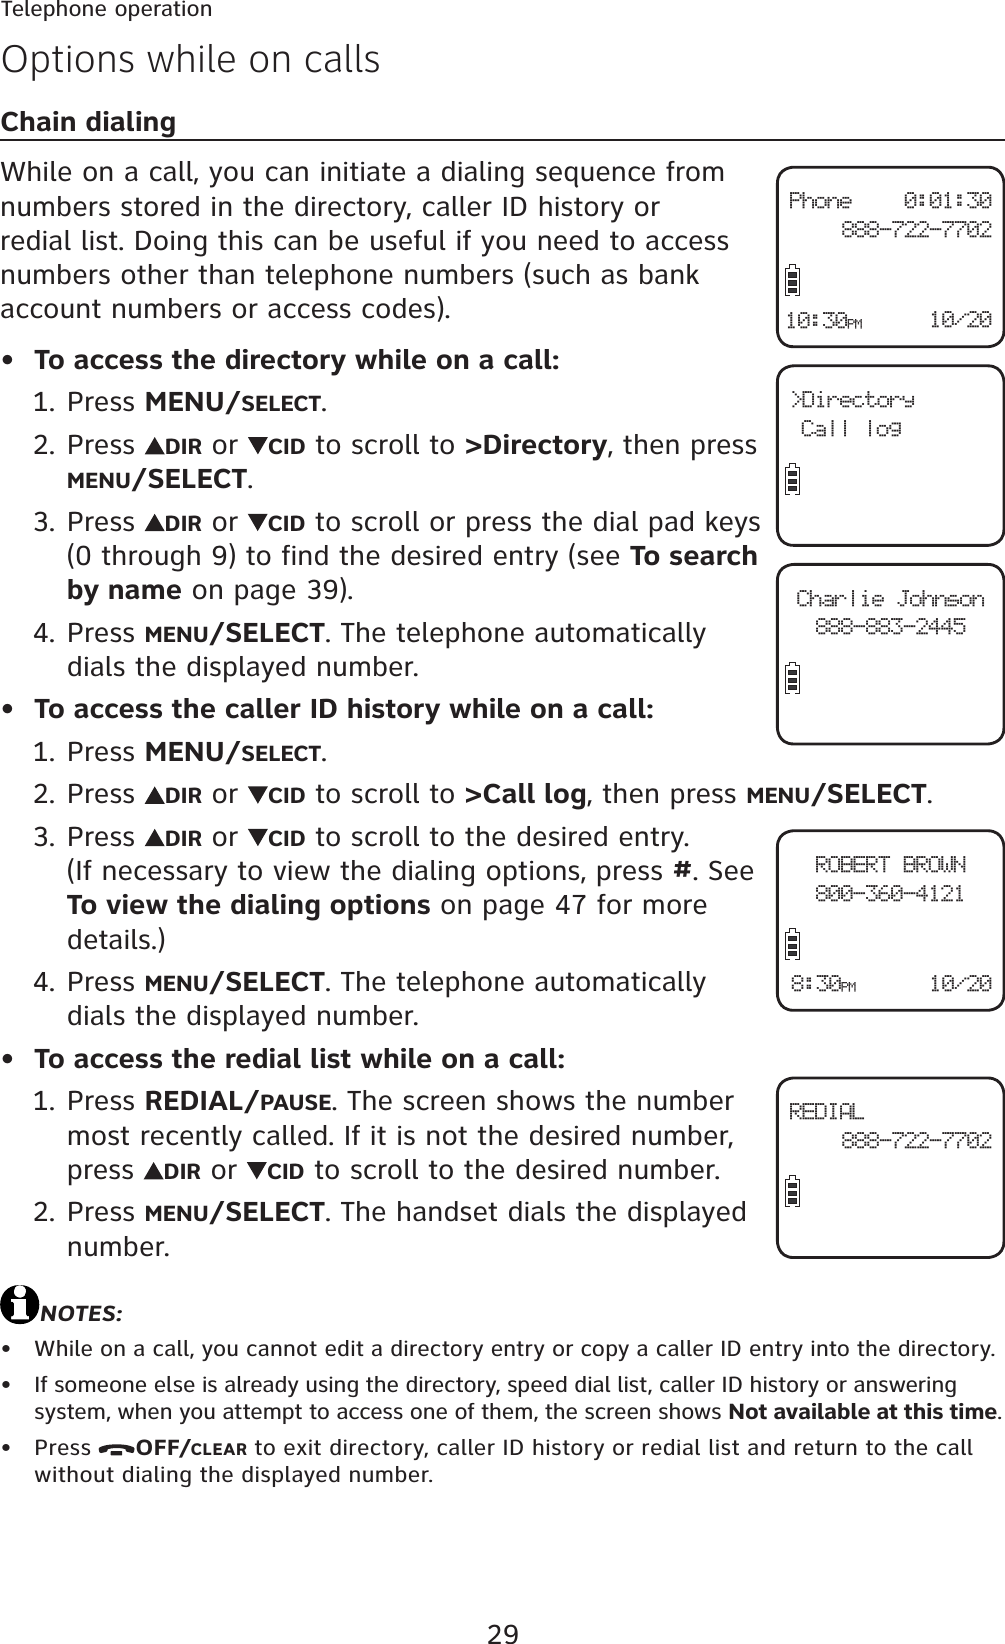 29Telephone operationOptions while on callsChain dialingWhile on a call, you can initiate a dialing sequence from numbers stored in the directory, caller ID history or redial list. Doing this can be useful if you need to access numbers other than telephone numbers (such as bank account numbers or access codes).To access the directory while on a call:Press MENU/SELECT.Press  DIR or  CID to scroll to &gt;Directory, then press MENU/SELECT.Press  DIR or  CID to scroll or press the dial pad keys (0 through 9) to find the desired entry (see To search by name on page 39).Press MENU/SELECT. The telephone automatically dials the displayed number.To access the caller ID history while on a call:Press MENU/SELECT.Press  DIR or  CID to scroll to &gt;Call log, then press MENU/SELECT.Press  DIR or  CID to scroll to the desired entry. (If necessary to view the dialing options, press #. See To view the dialing options on page 47 for more details.)Press MENU/SELECT. The telephone automatically dials the displayed number.To access the redial list while on a call:Press REDIAL/PAUSE. The screen shows the number most recently called. If it is not the desired number, press  DIR or  CID to scroll to the desired number.Press MENU/SELECT. The handset dials the displayed number.NOTES:While on a call, you cannot edit a directory entry or copy a caller ID entry into the directory.If someone else is already using the directory, speed dial list, caller ID history or answering system, when you attempt to access one of them, the screen shows Not available at this time.Press OFF/CLEAR to exit directory, caller ID history or redial list and return to the call without dialing the displayed number.•1.2.3.4.•1.2.3.4.•1.2.•••&gt;DirectoryCall logCharlie Johnson888-883-2445Phone 0:01:30 888-722-770210/2010:30PMROBERT BROWN800-360-412110/208:30PMREDIAL 888-722-7702